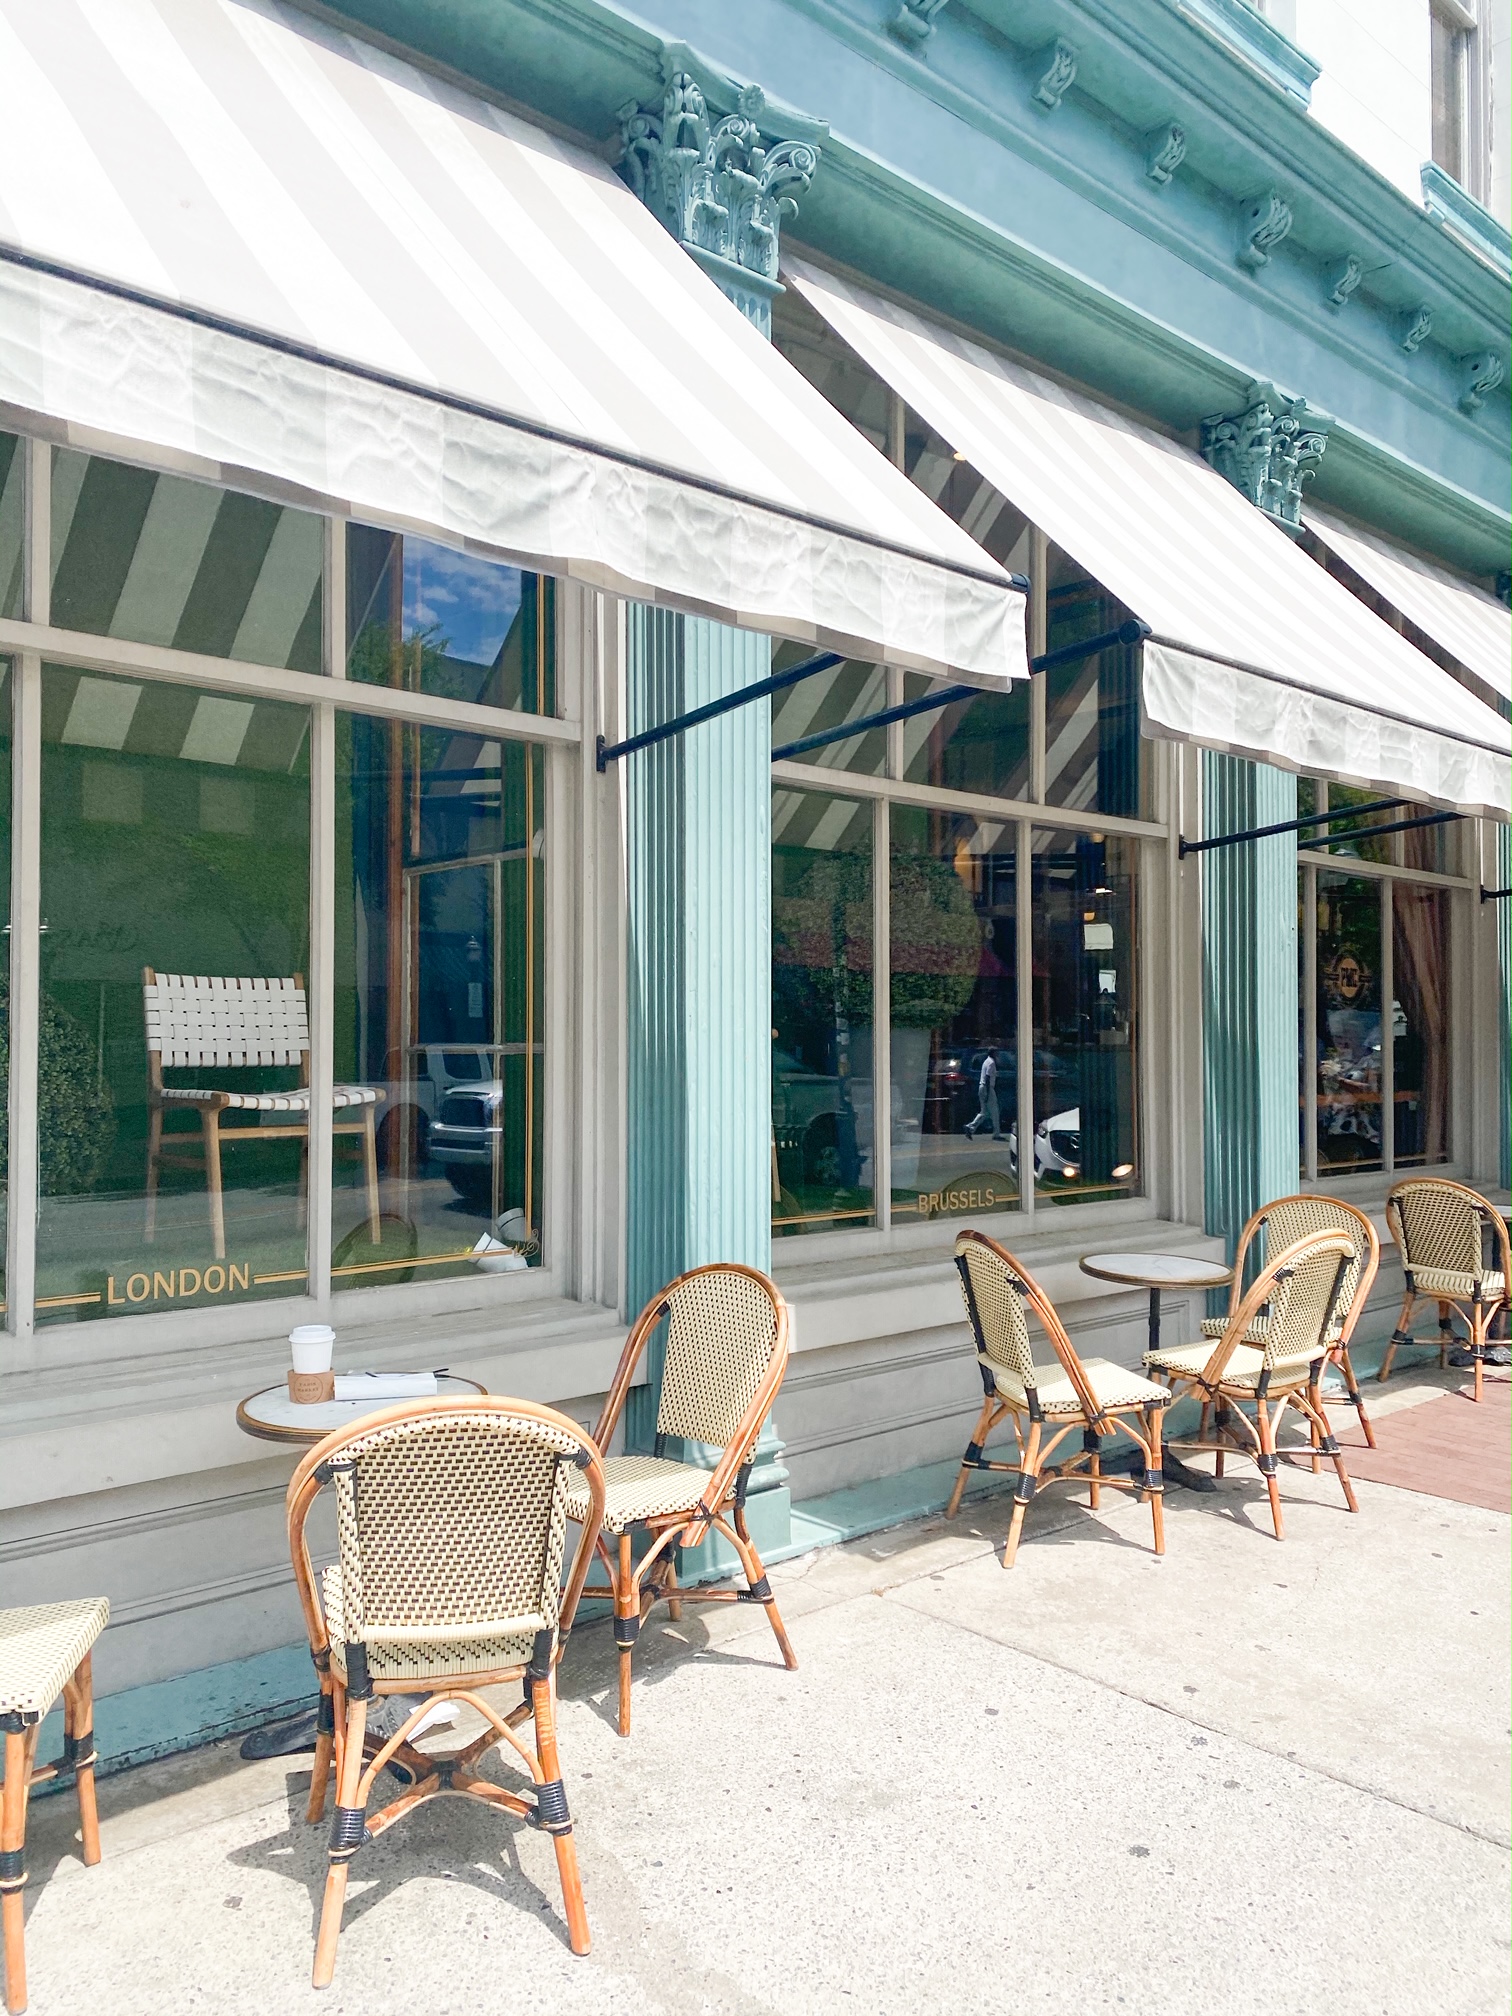 The exterior of the Paris Market in Historic Savannah Georgia. The building is painted a pale blue green and has cream and greyish tan striped awnings above the large glass windows. There are sets of outdoor dining tables and chairs that  are wooden with woven backs and seats. 